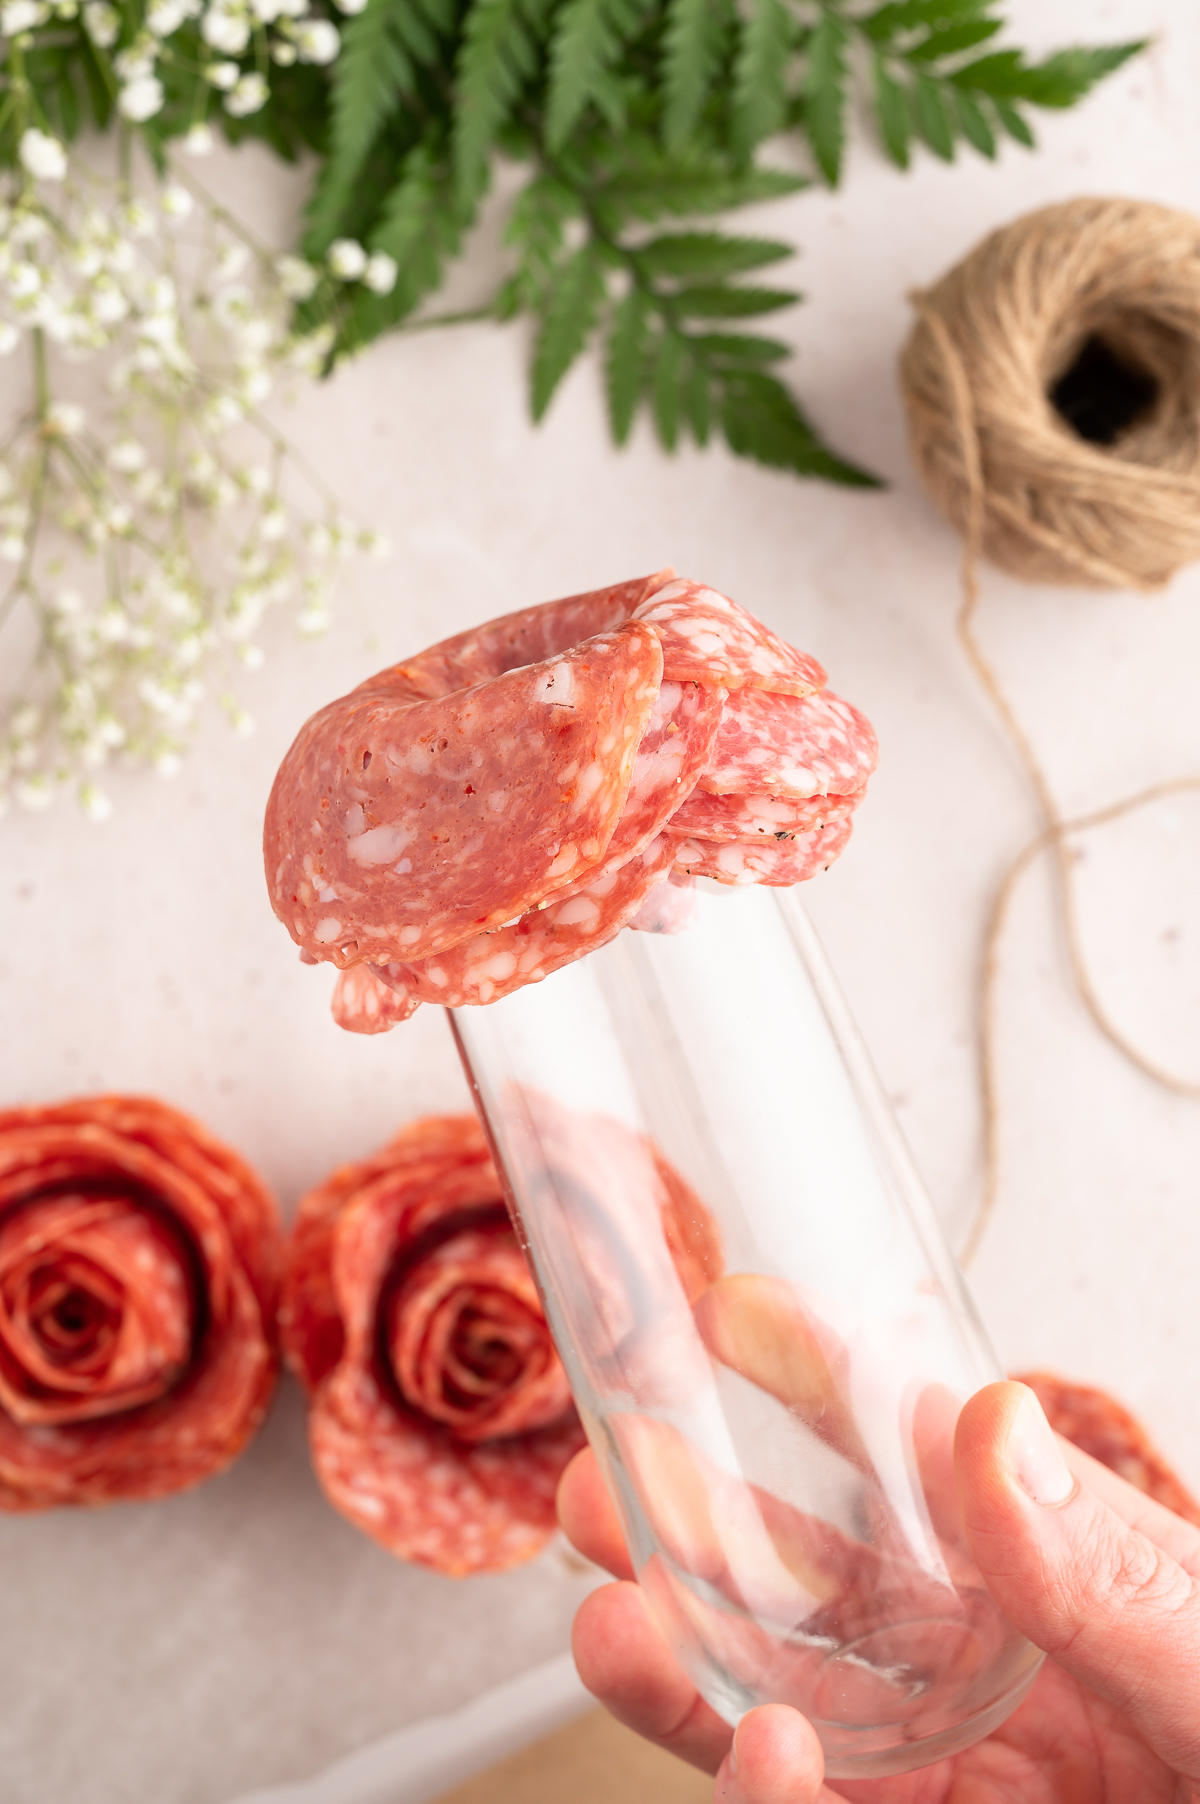 showcasing layers of salami on a glass to make salami roses